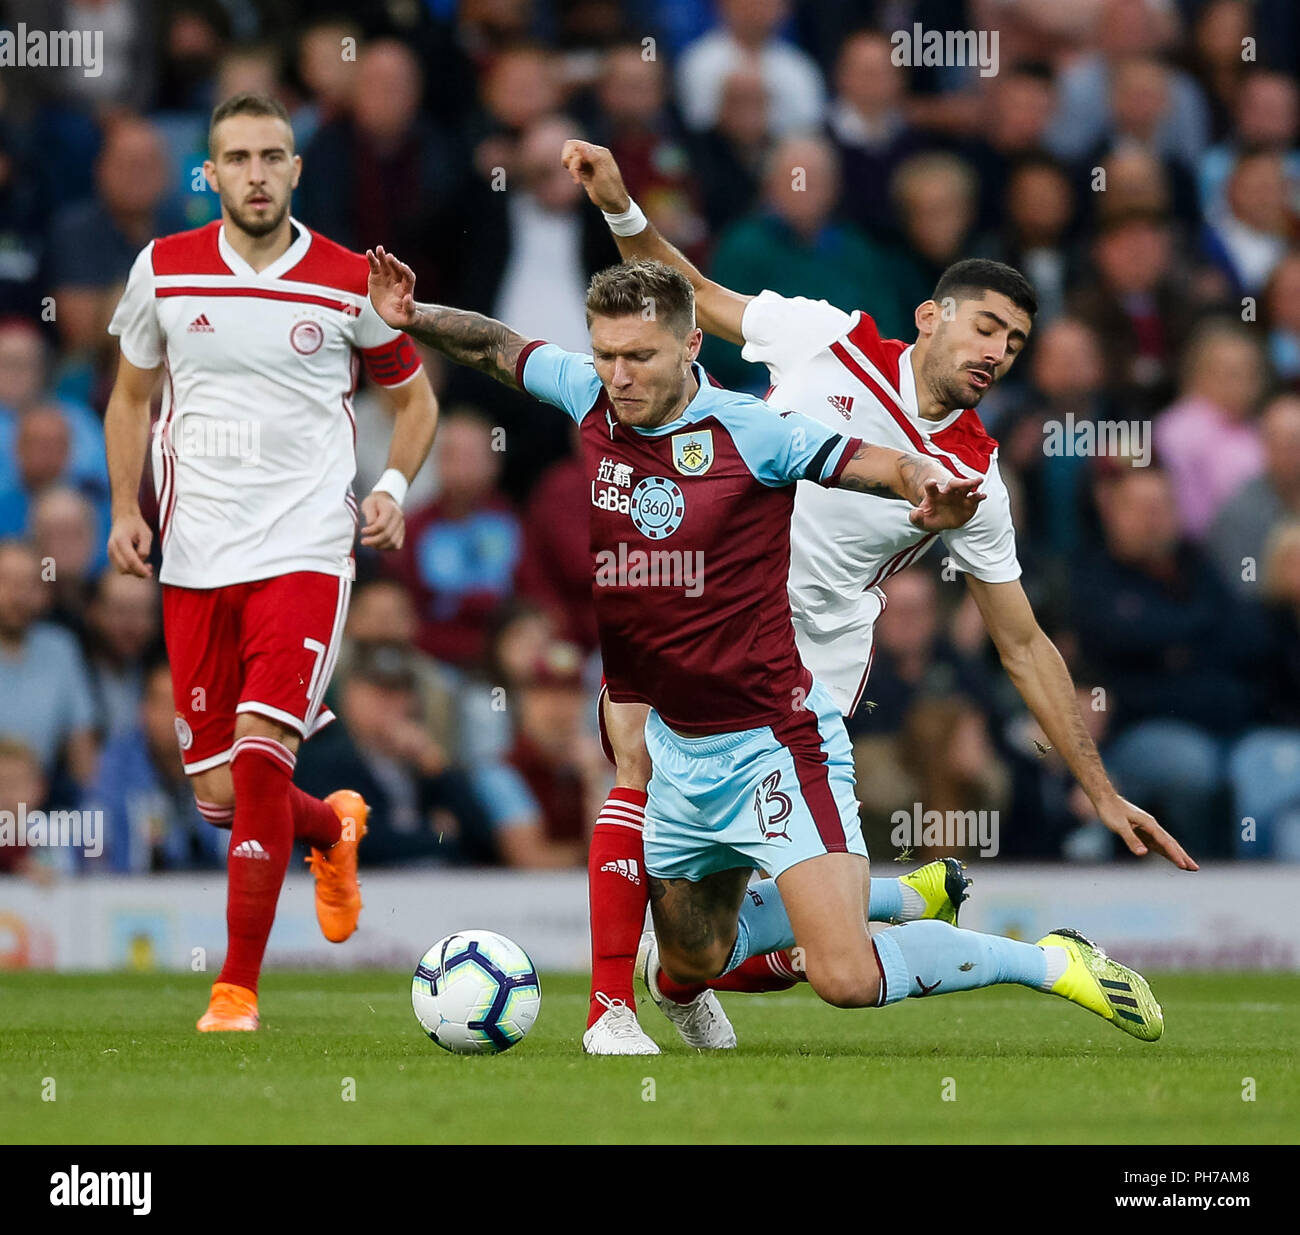 Burnley, UK. 30th August 2018. Jeff Hendrick of Burnley during the UEFA Europa League Play-Off Round second leg match between Burnley and Olympiakos at Turf Moor on August 30th 2018 in Burnley, England. Credit: PHC Images/Alamy Live News Stock Photo